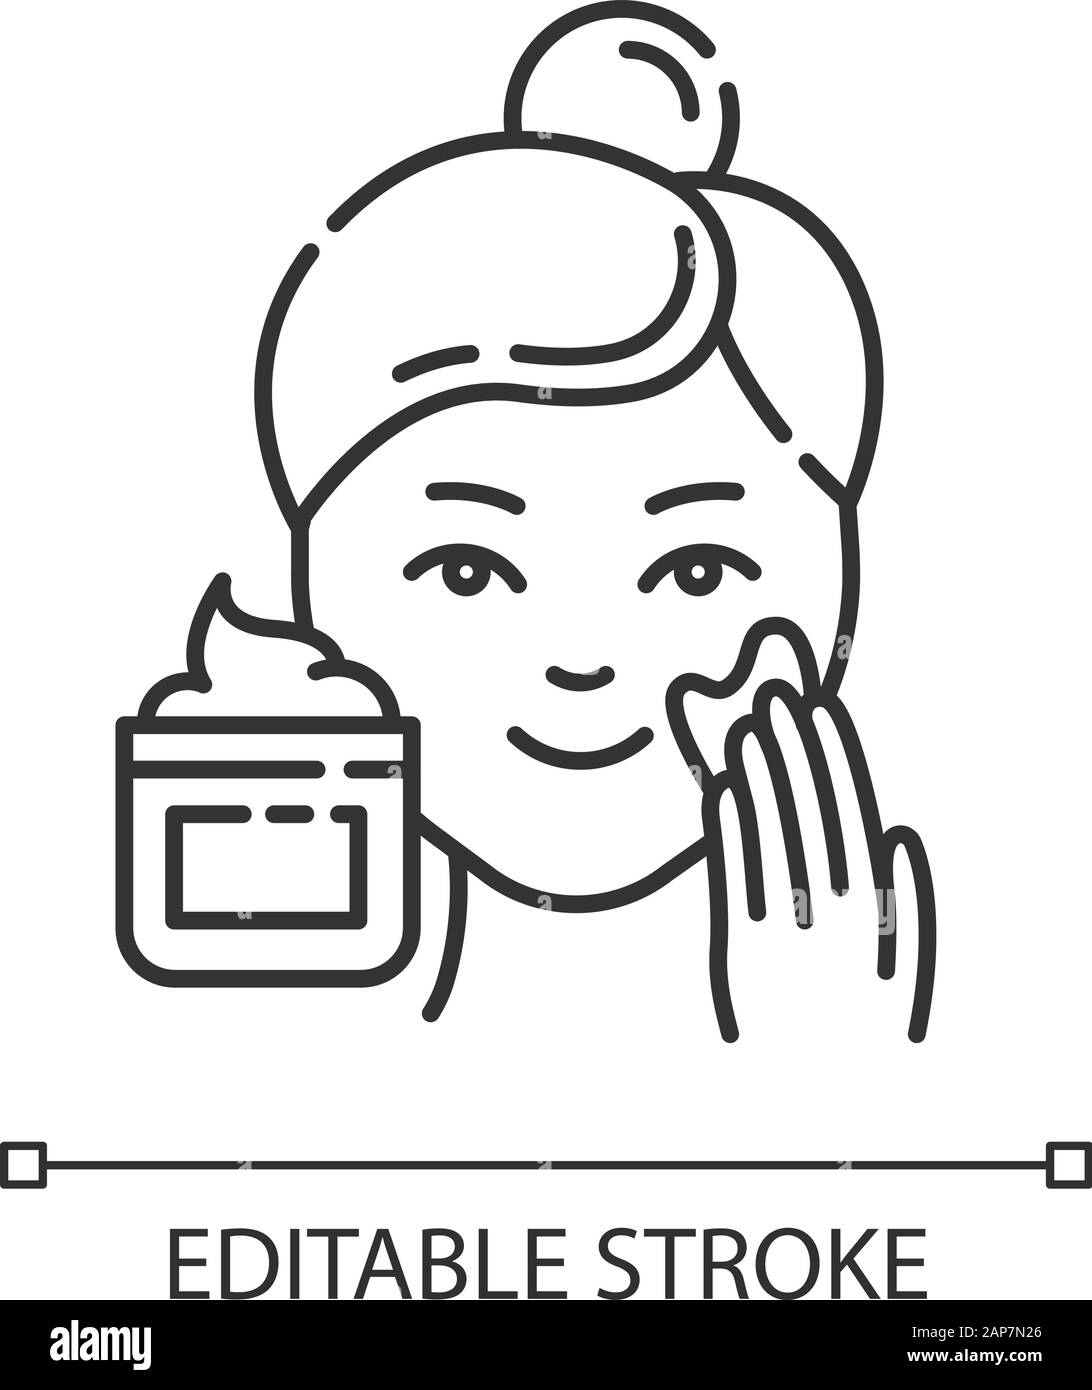 Facial Product Line